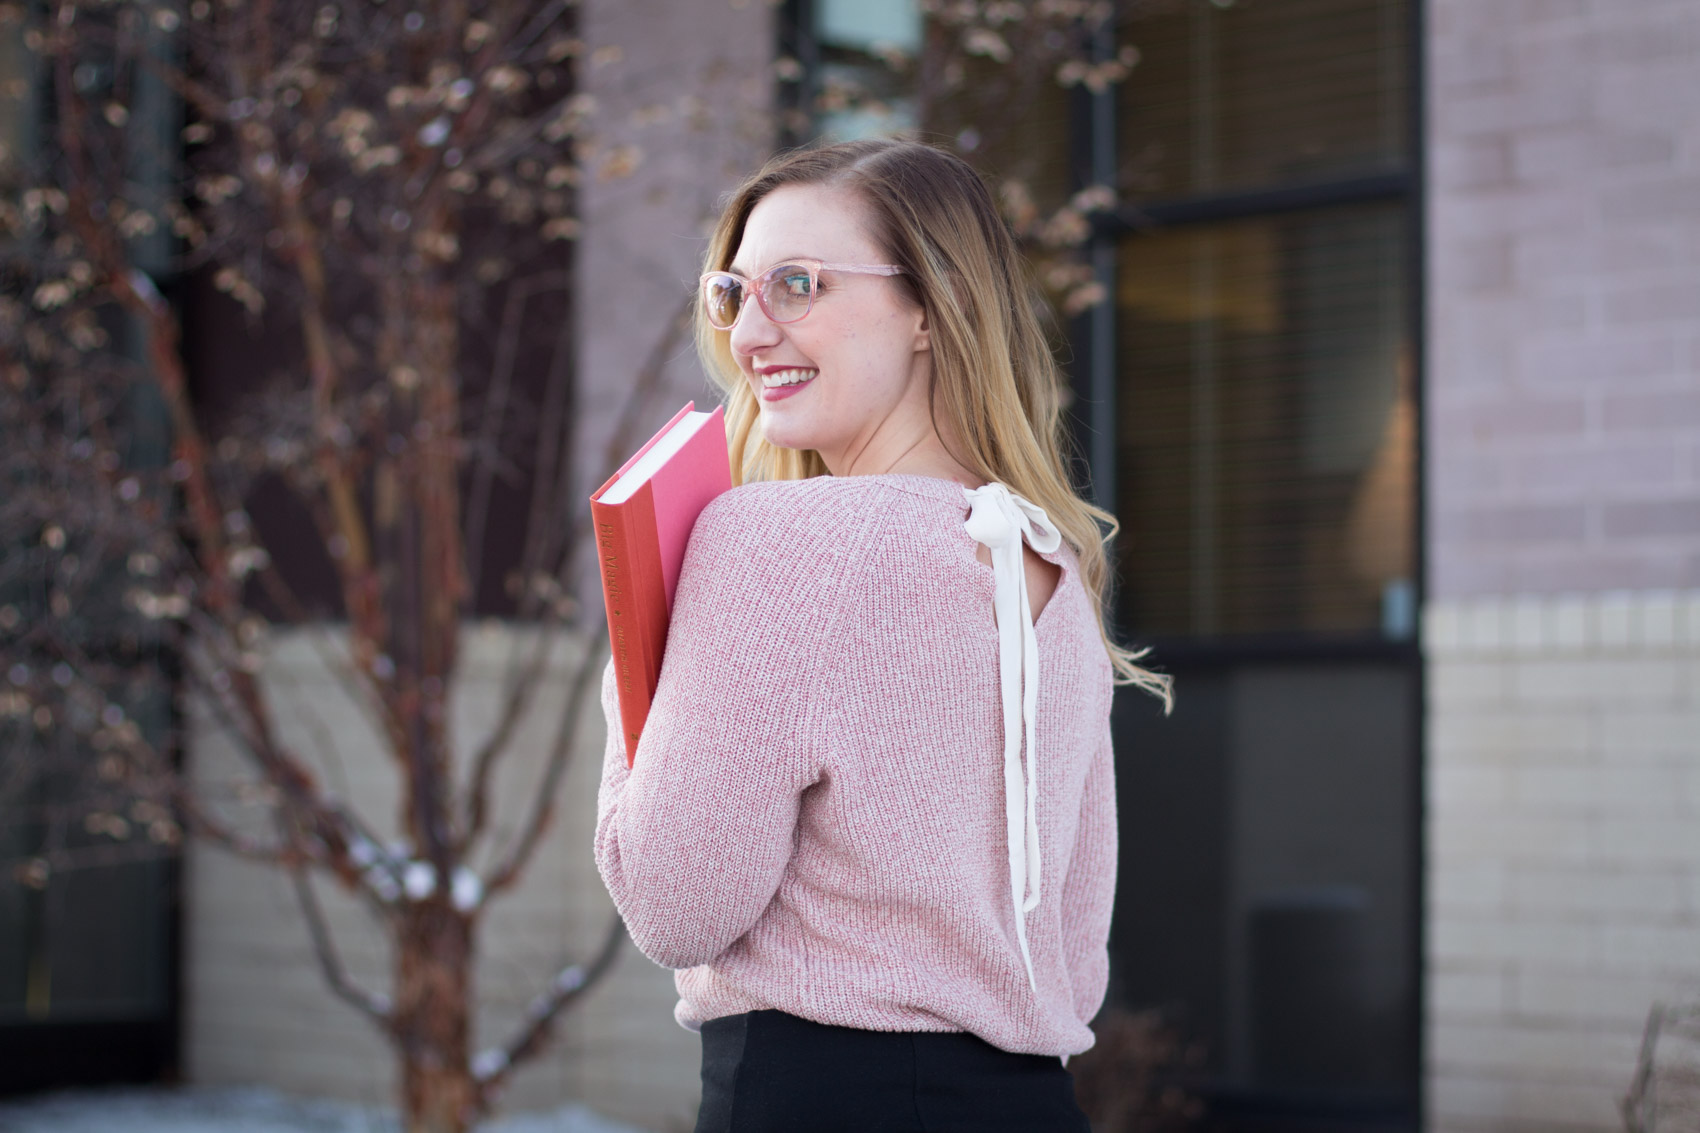 Heart sweaters and bow details lend the perfect romantic touches when it comes to casual Valentine's Day outfit ideas for women! 